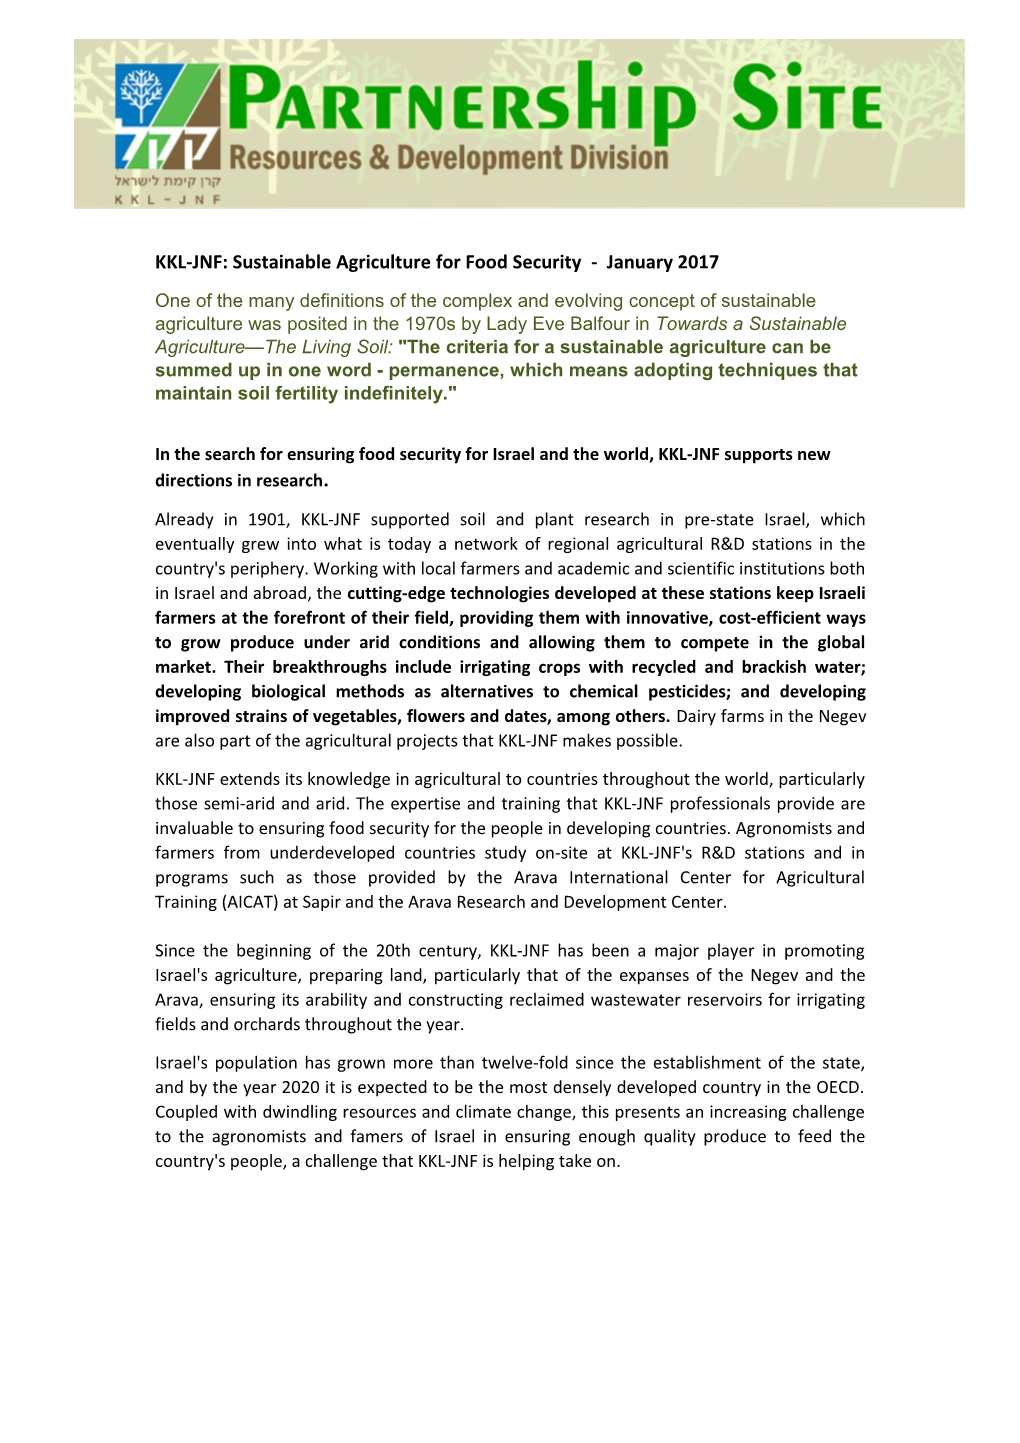 KKL-JNF:Sustainable Agriculture for Food Security - January 2017